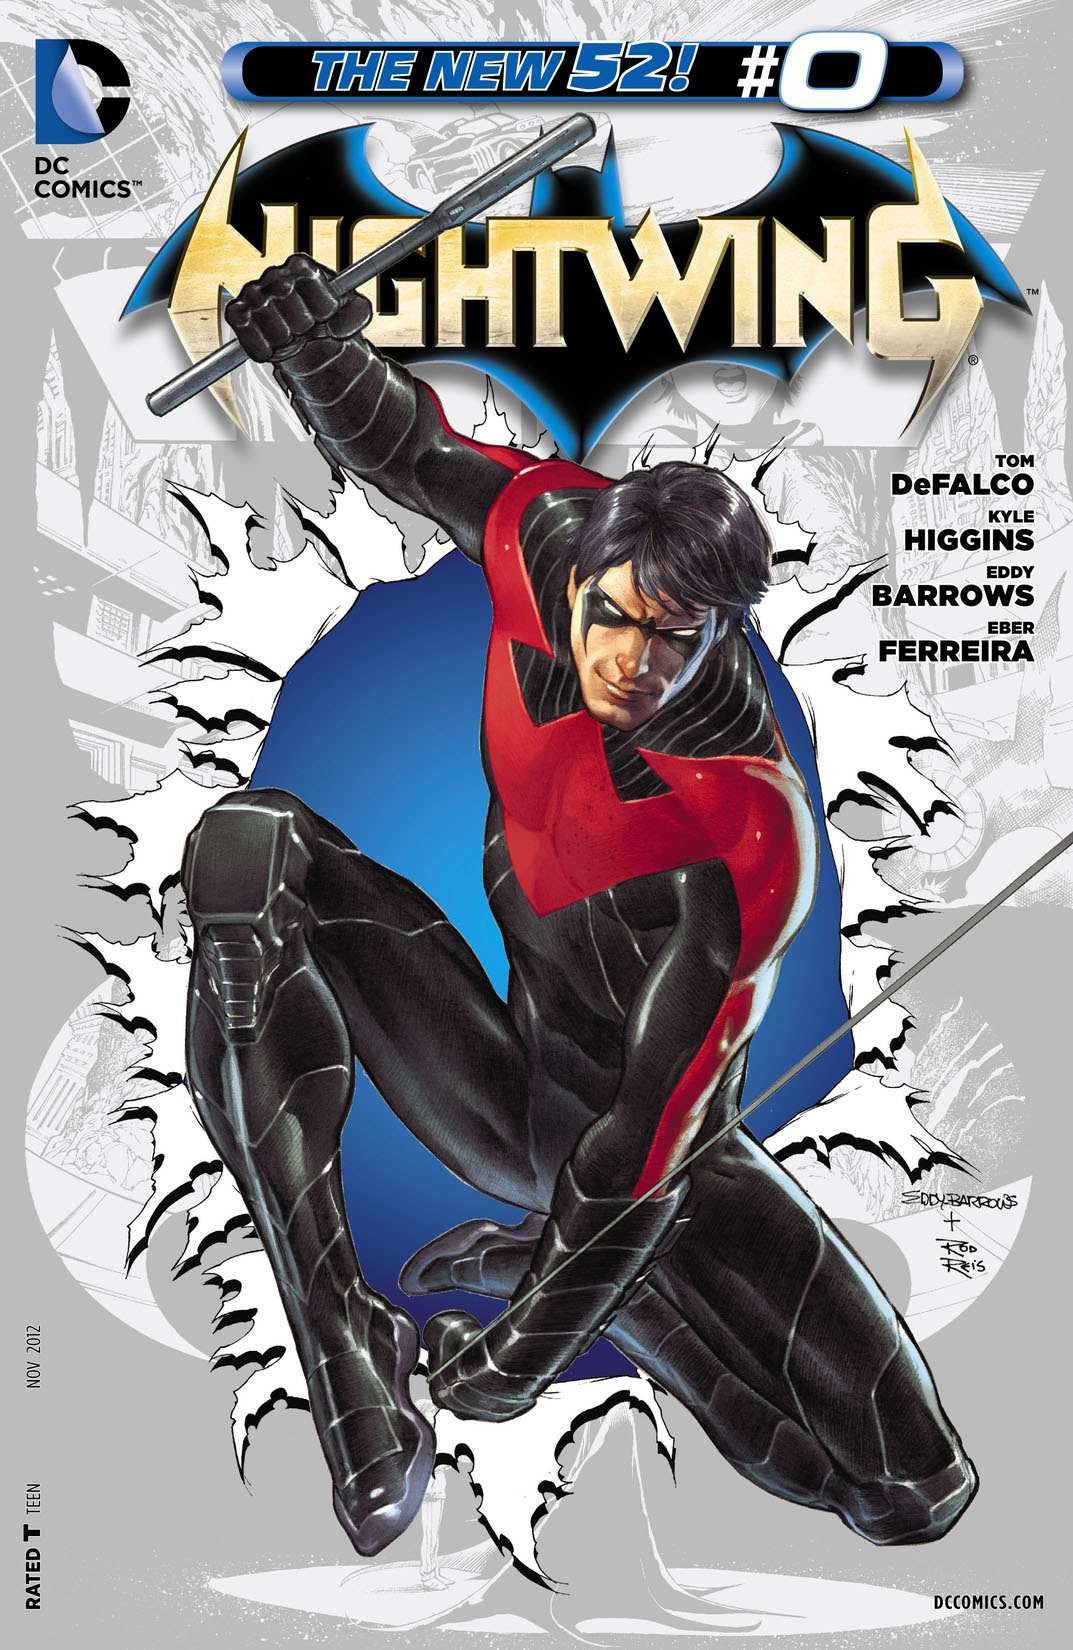 Nightwing (2011-) #0 preview images